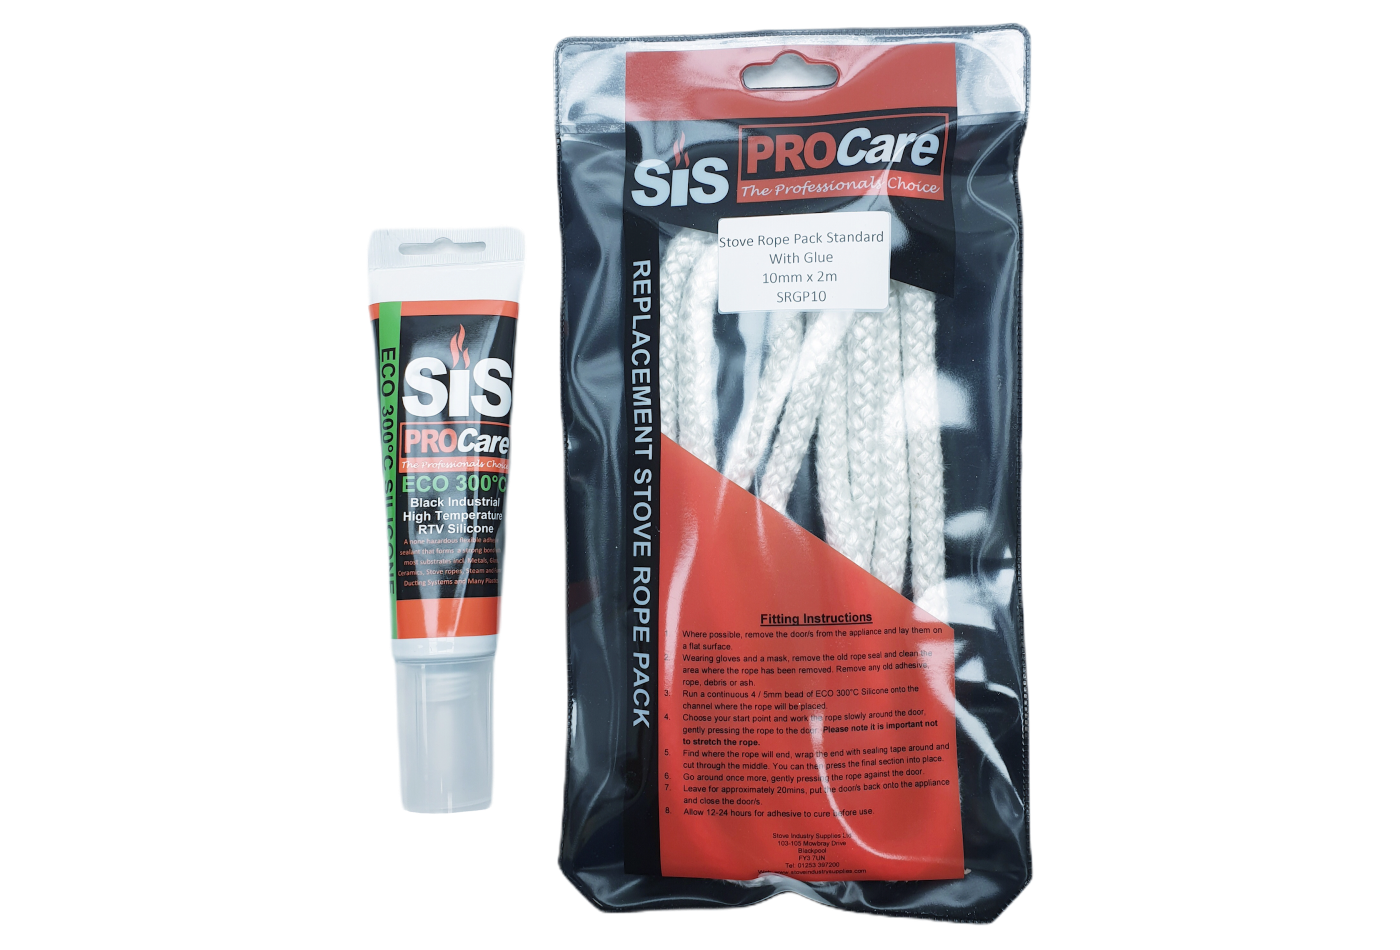 SiS Procare White 10 milimetre x 2 metre Standard Stove Rope & 80 millilitre Rope Glue Pack - product code SRGP10